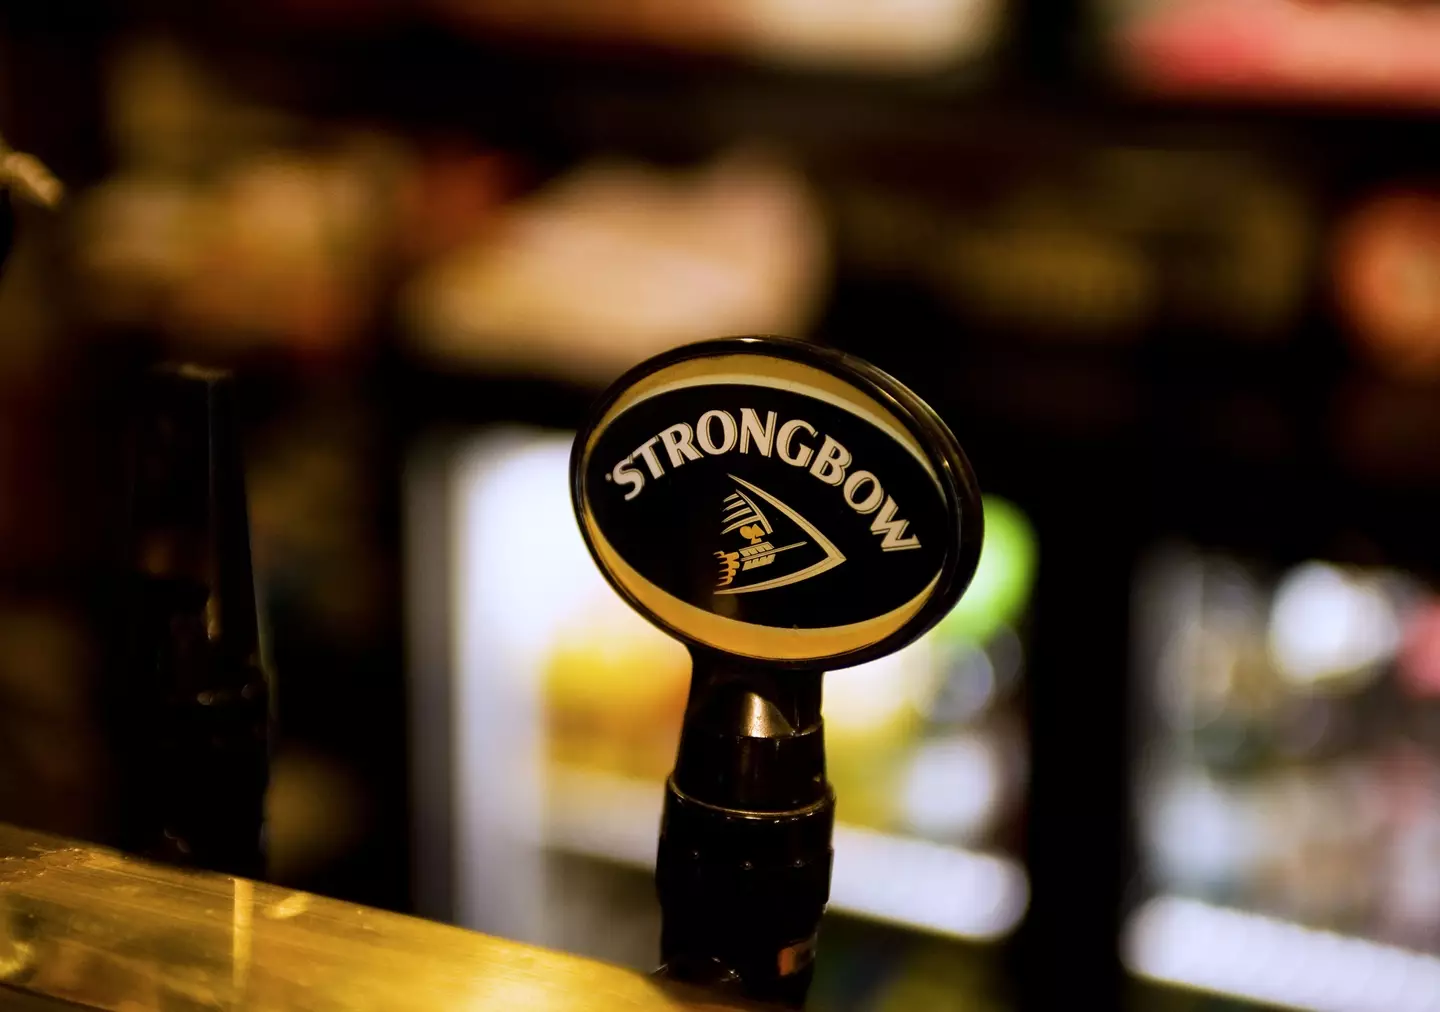 Strongbow will be off the menu.